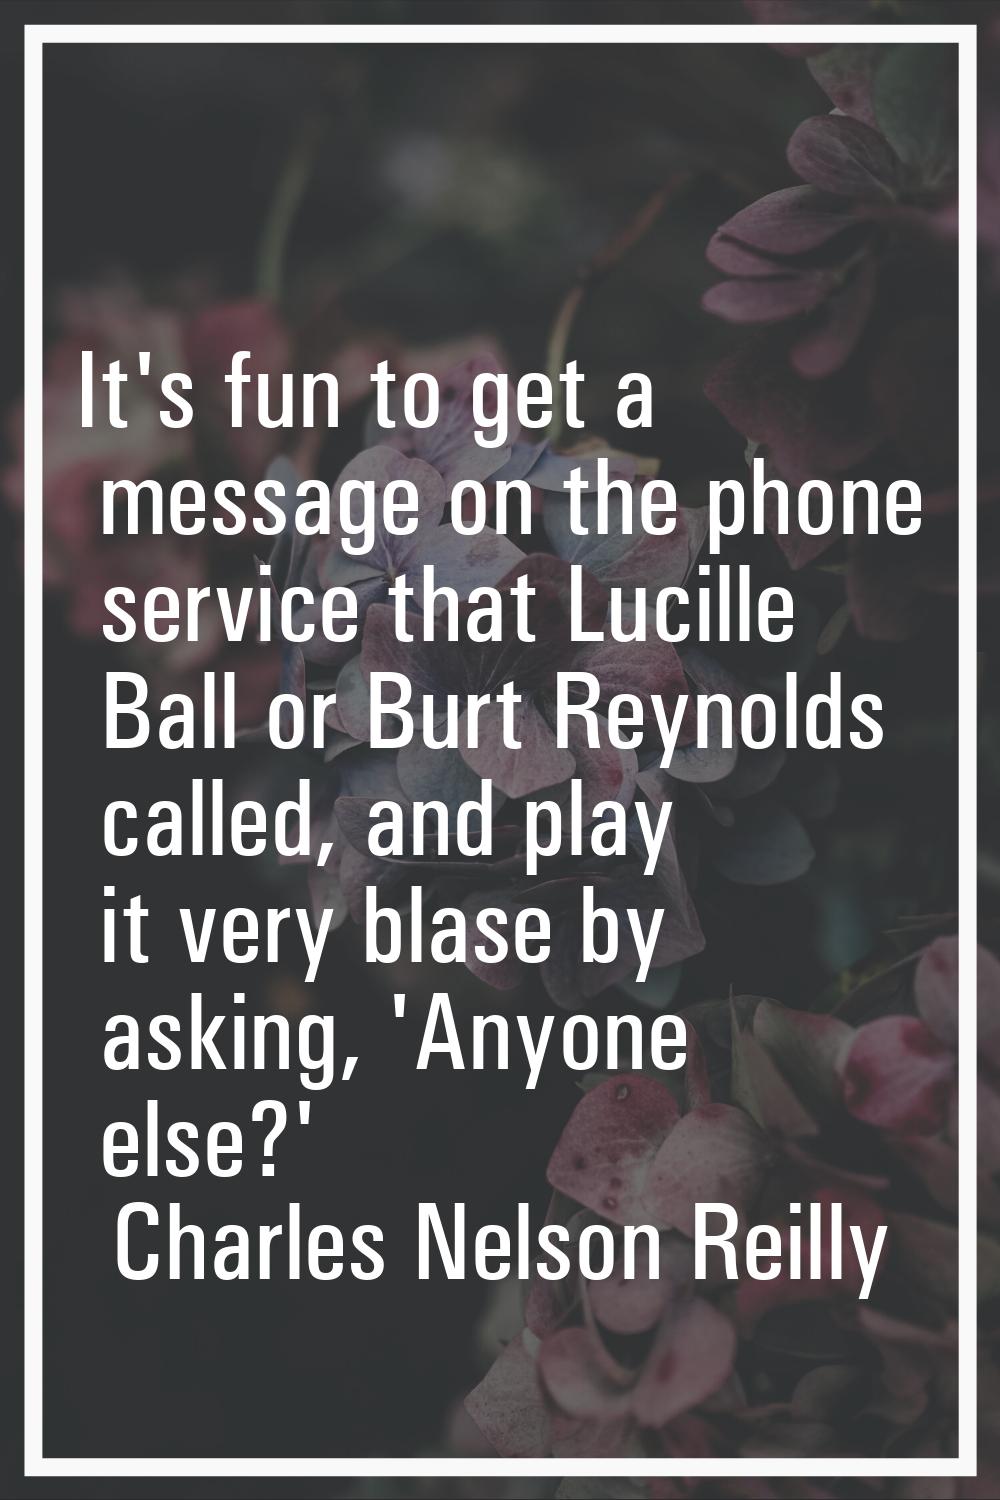 It's fun to get a message on the phone service that Lucille Ball or Burt Reynolds called, and play 